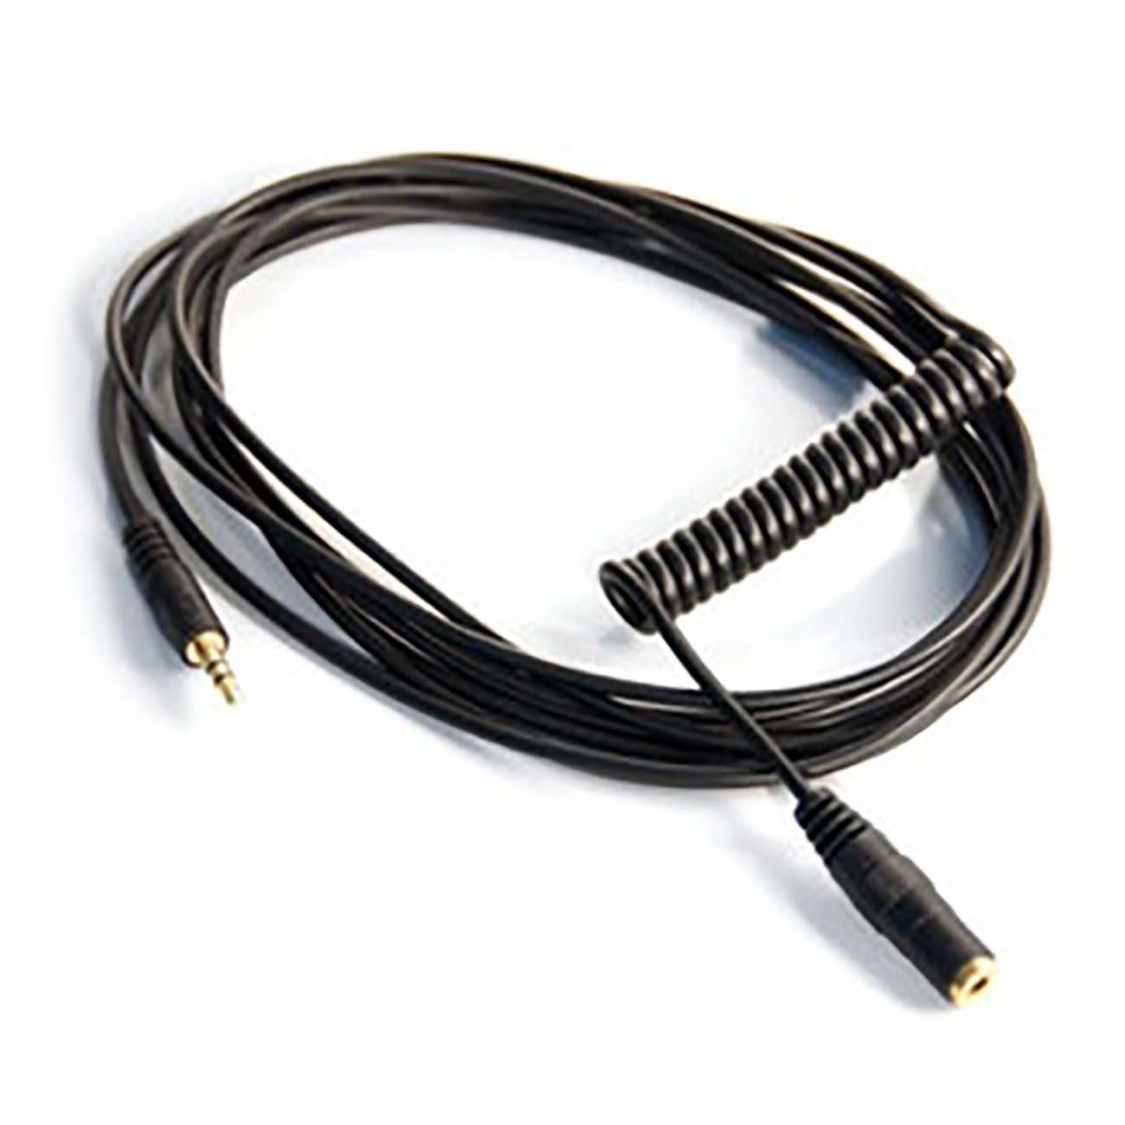 Rode 3.5mm Minijack Stereo Extension Cable (3m)